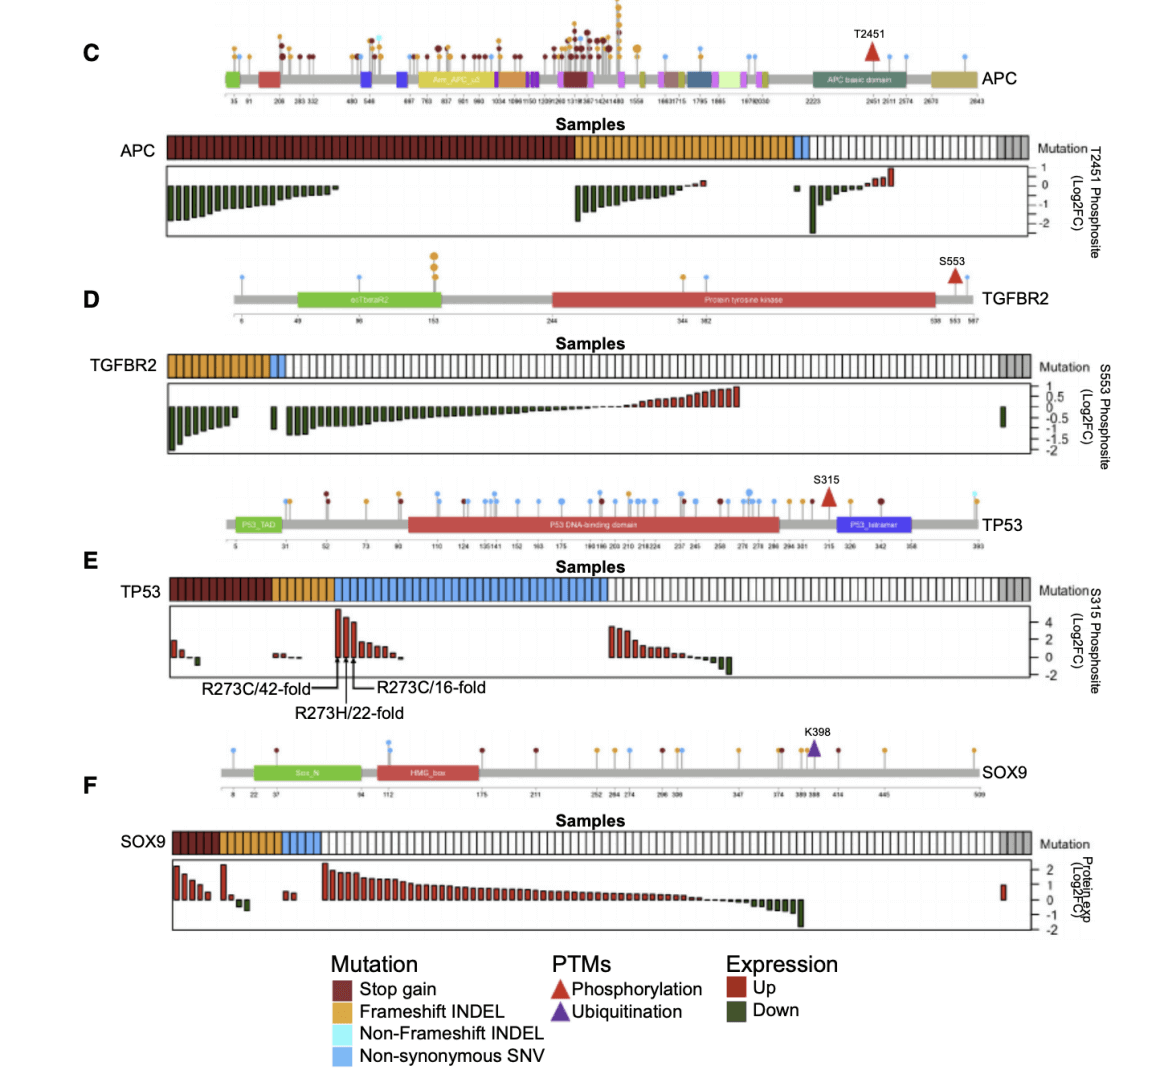 Combined analysis of proteomics and genomics reveals new therapeutic strategies for human colon cancer